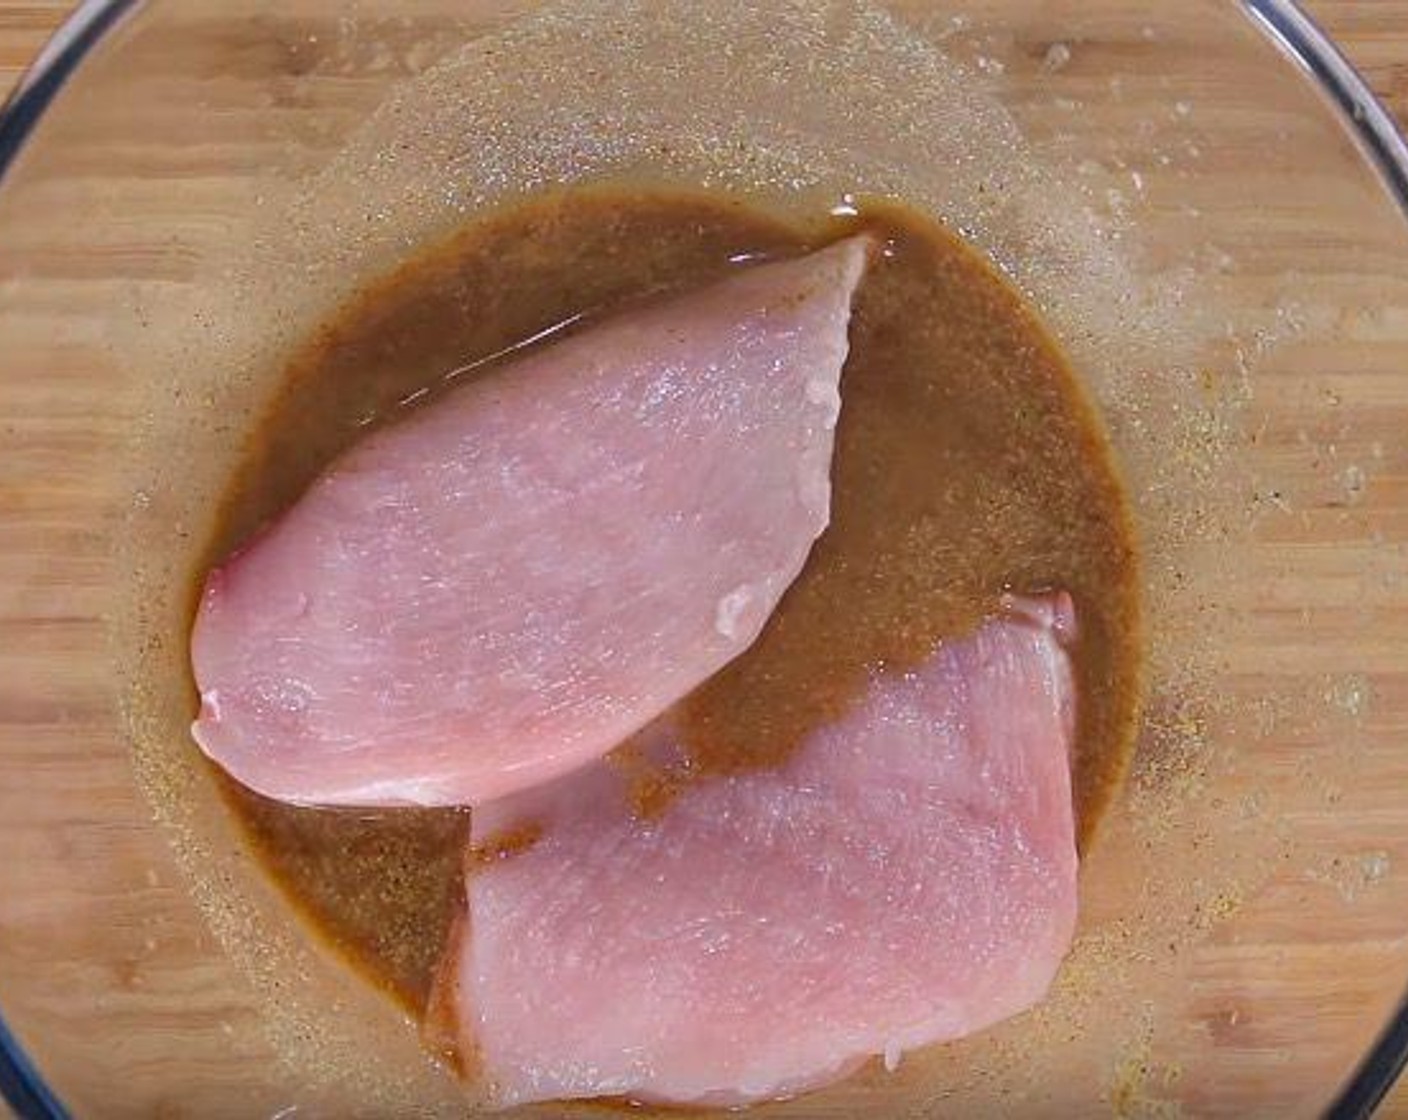 step 2 Add Boneless, Skinless Chicken Breasts (2) to the brine, coating well. Place in the refrigerator for 4 hours or overnight.